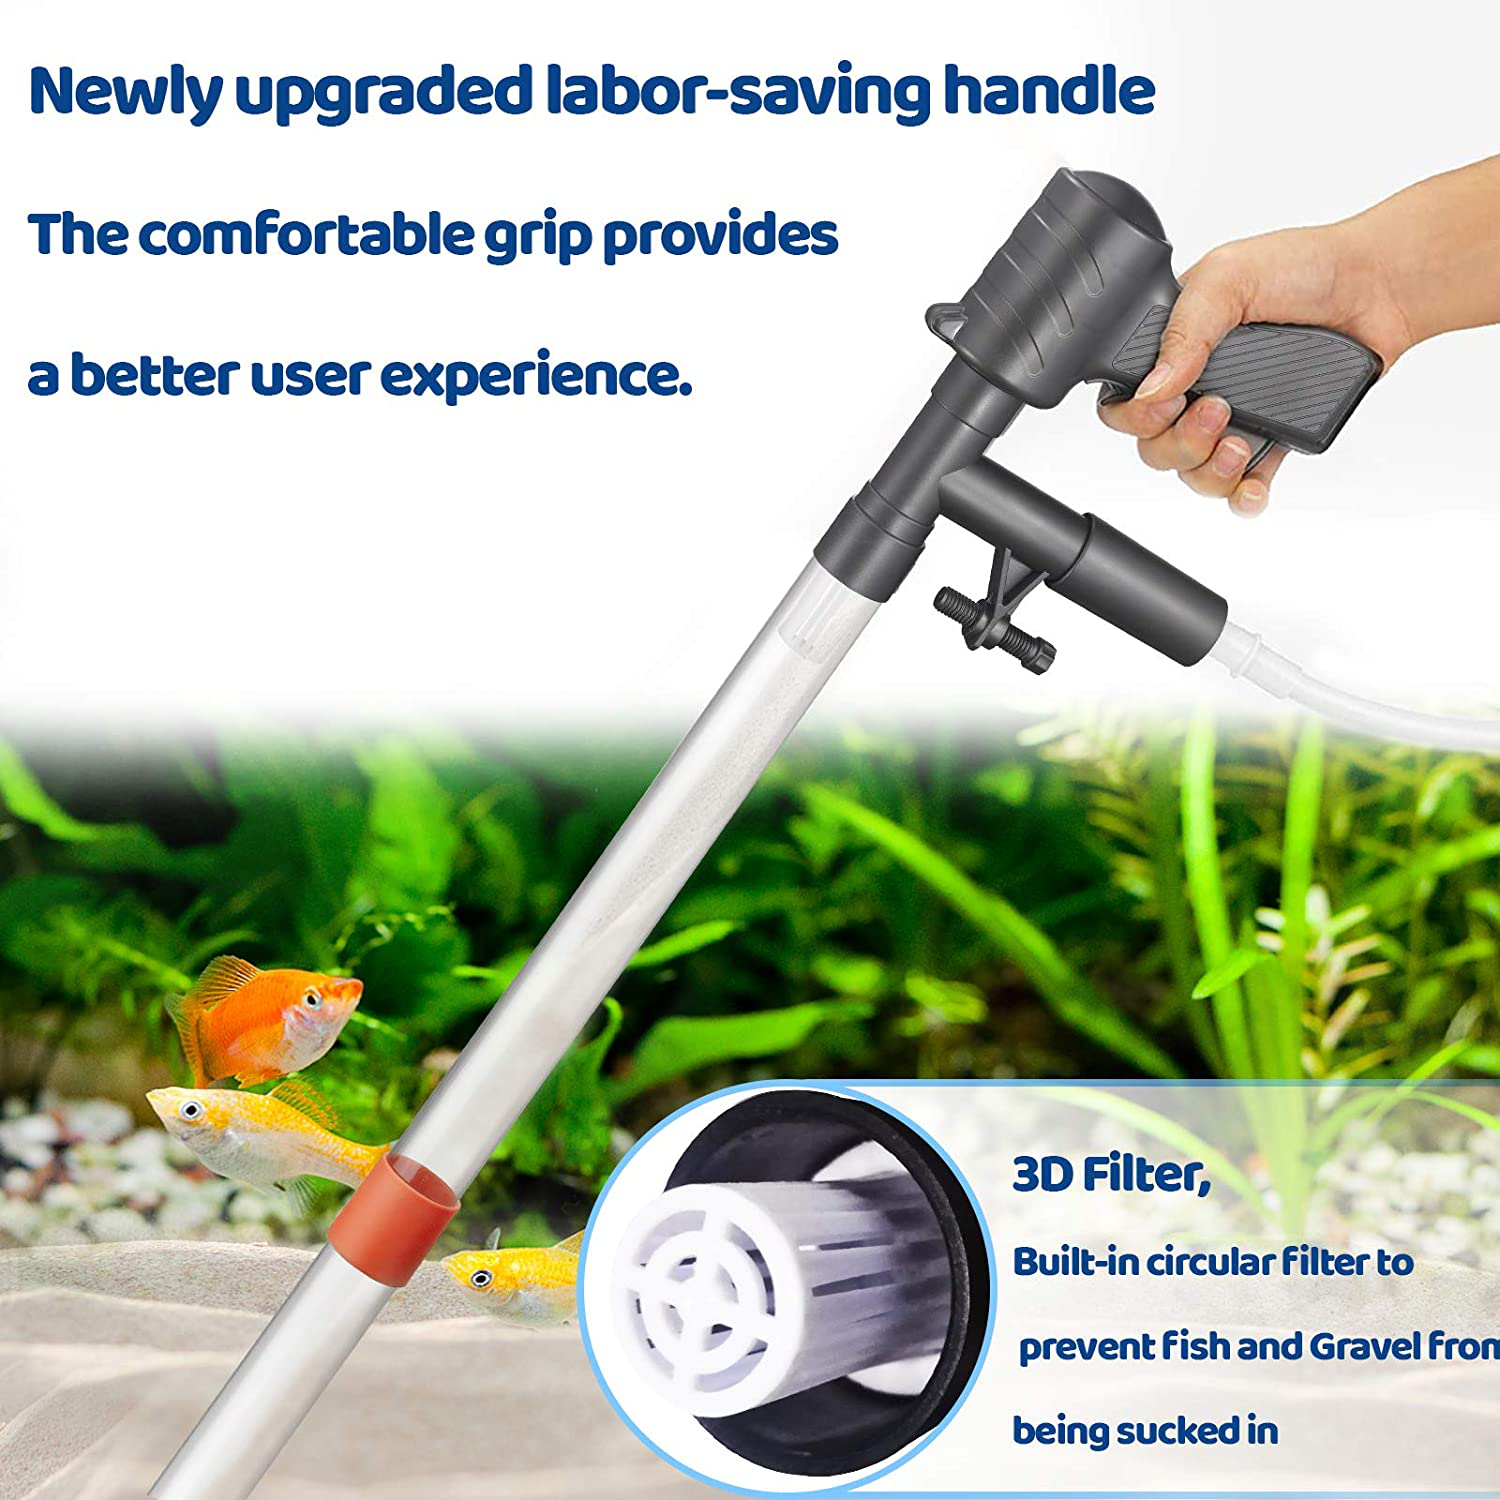 STARROAD-TIM Fish Tank Gravel Cleaner Newly Upgraded Fish Tank Water Changer with Air Pressure Button Long Nozzle Water Flow Controller for Fish Tank Cleaning Gravel and Sand Animals & Pet Supplies > Pet Supplies > Fish Supplies > Aquarium Cleaning Supplies STARROAD-TIM   